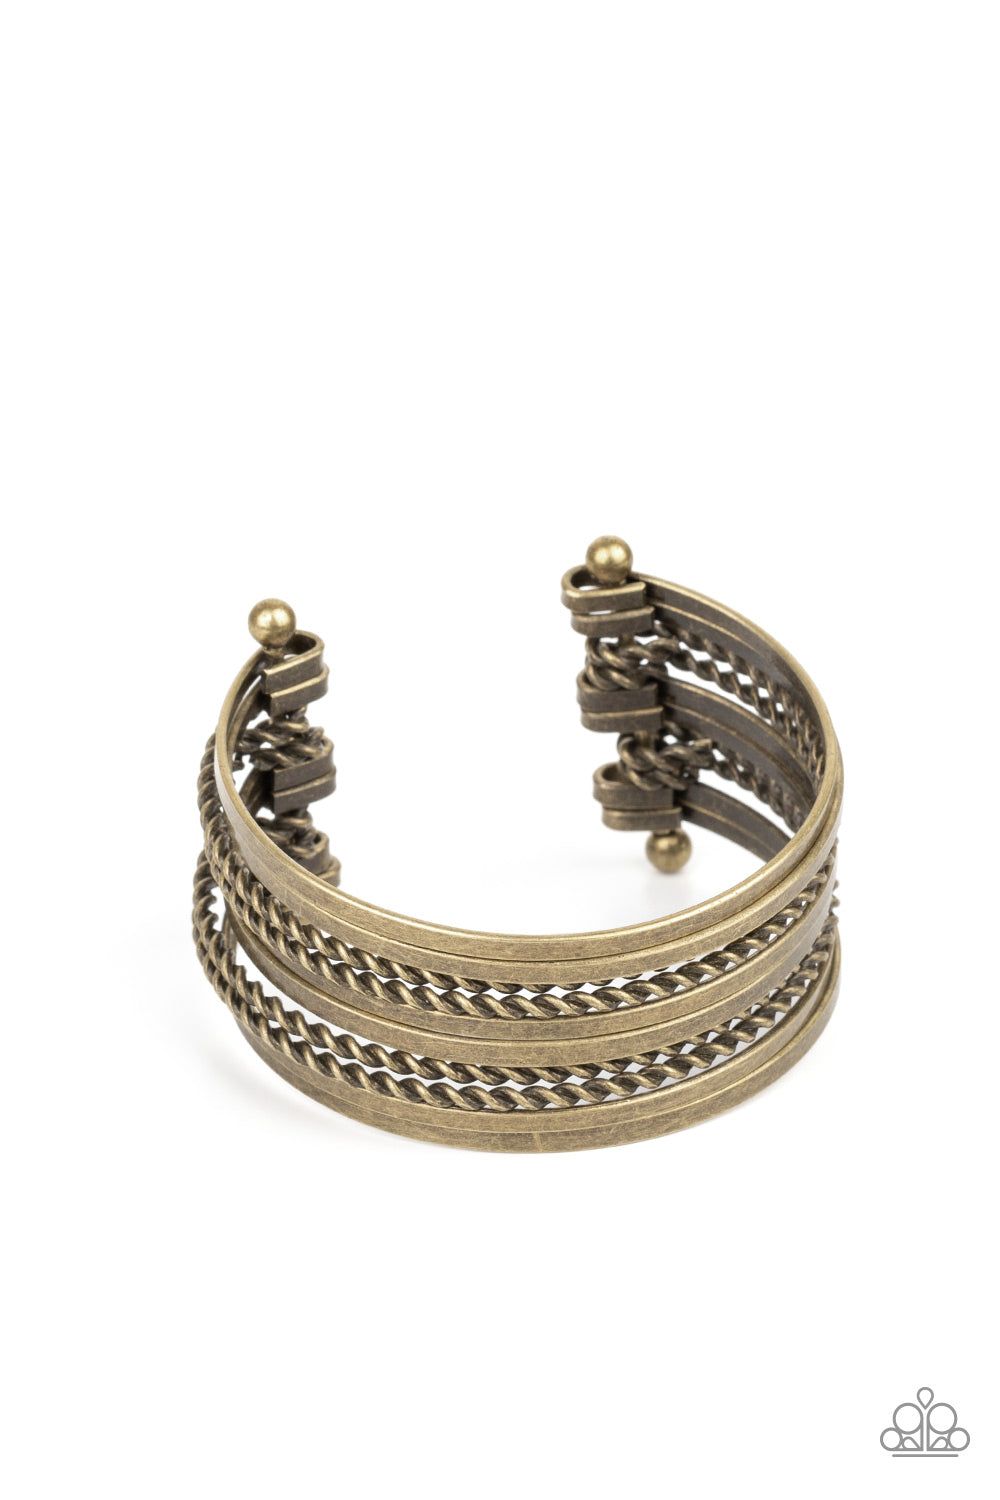 Beautiful stacked bandle bracelets with an illusion of stacked bangles.